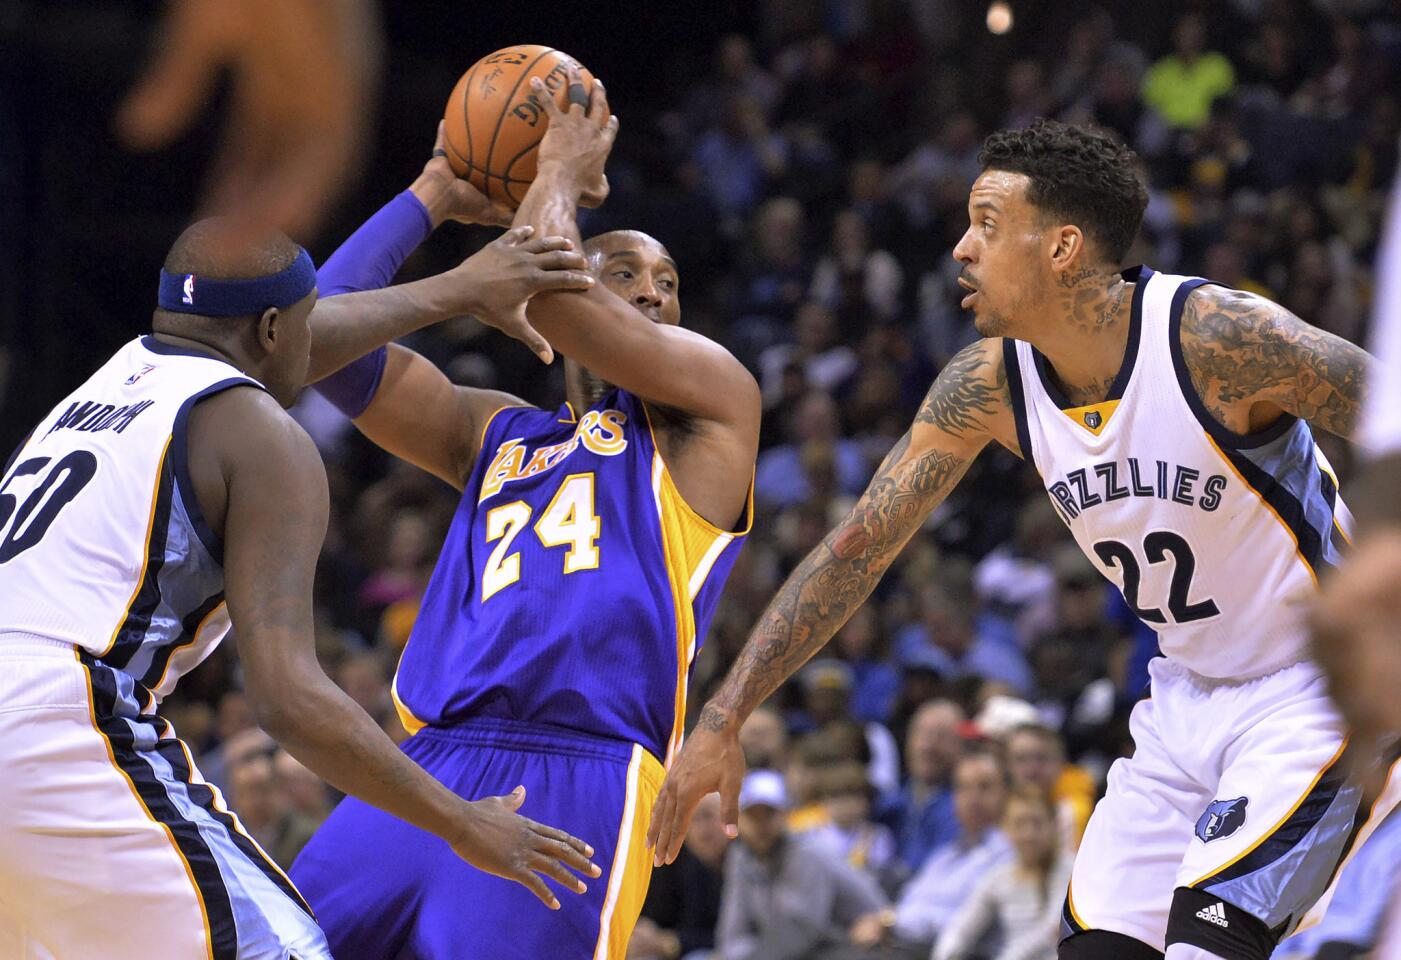 Kobe Bryant looks to pass while being defended by Grizzlies forwards Zach Randolph and Matt Barnes (22) during the first half of a game on Feb. 24.